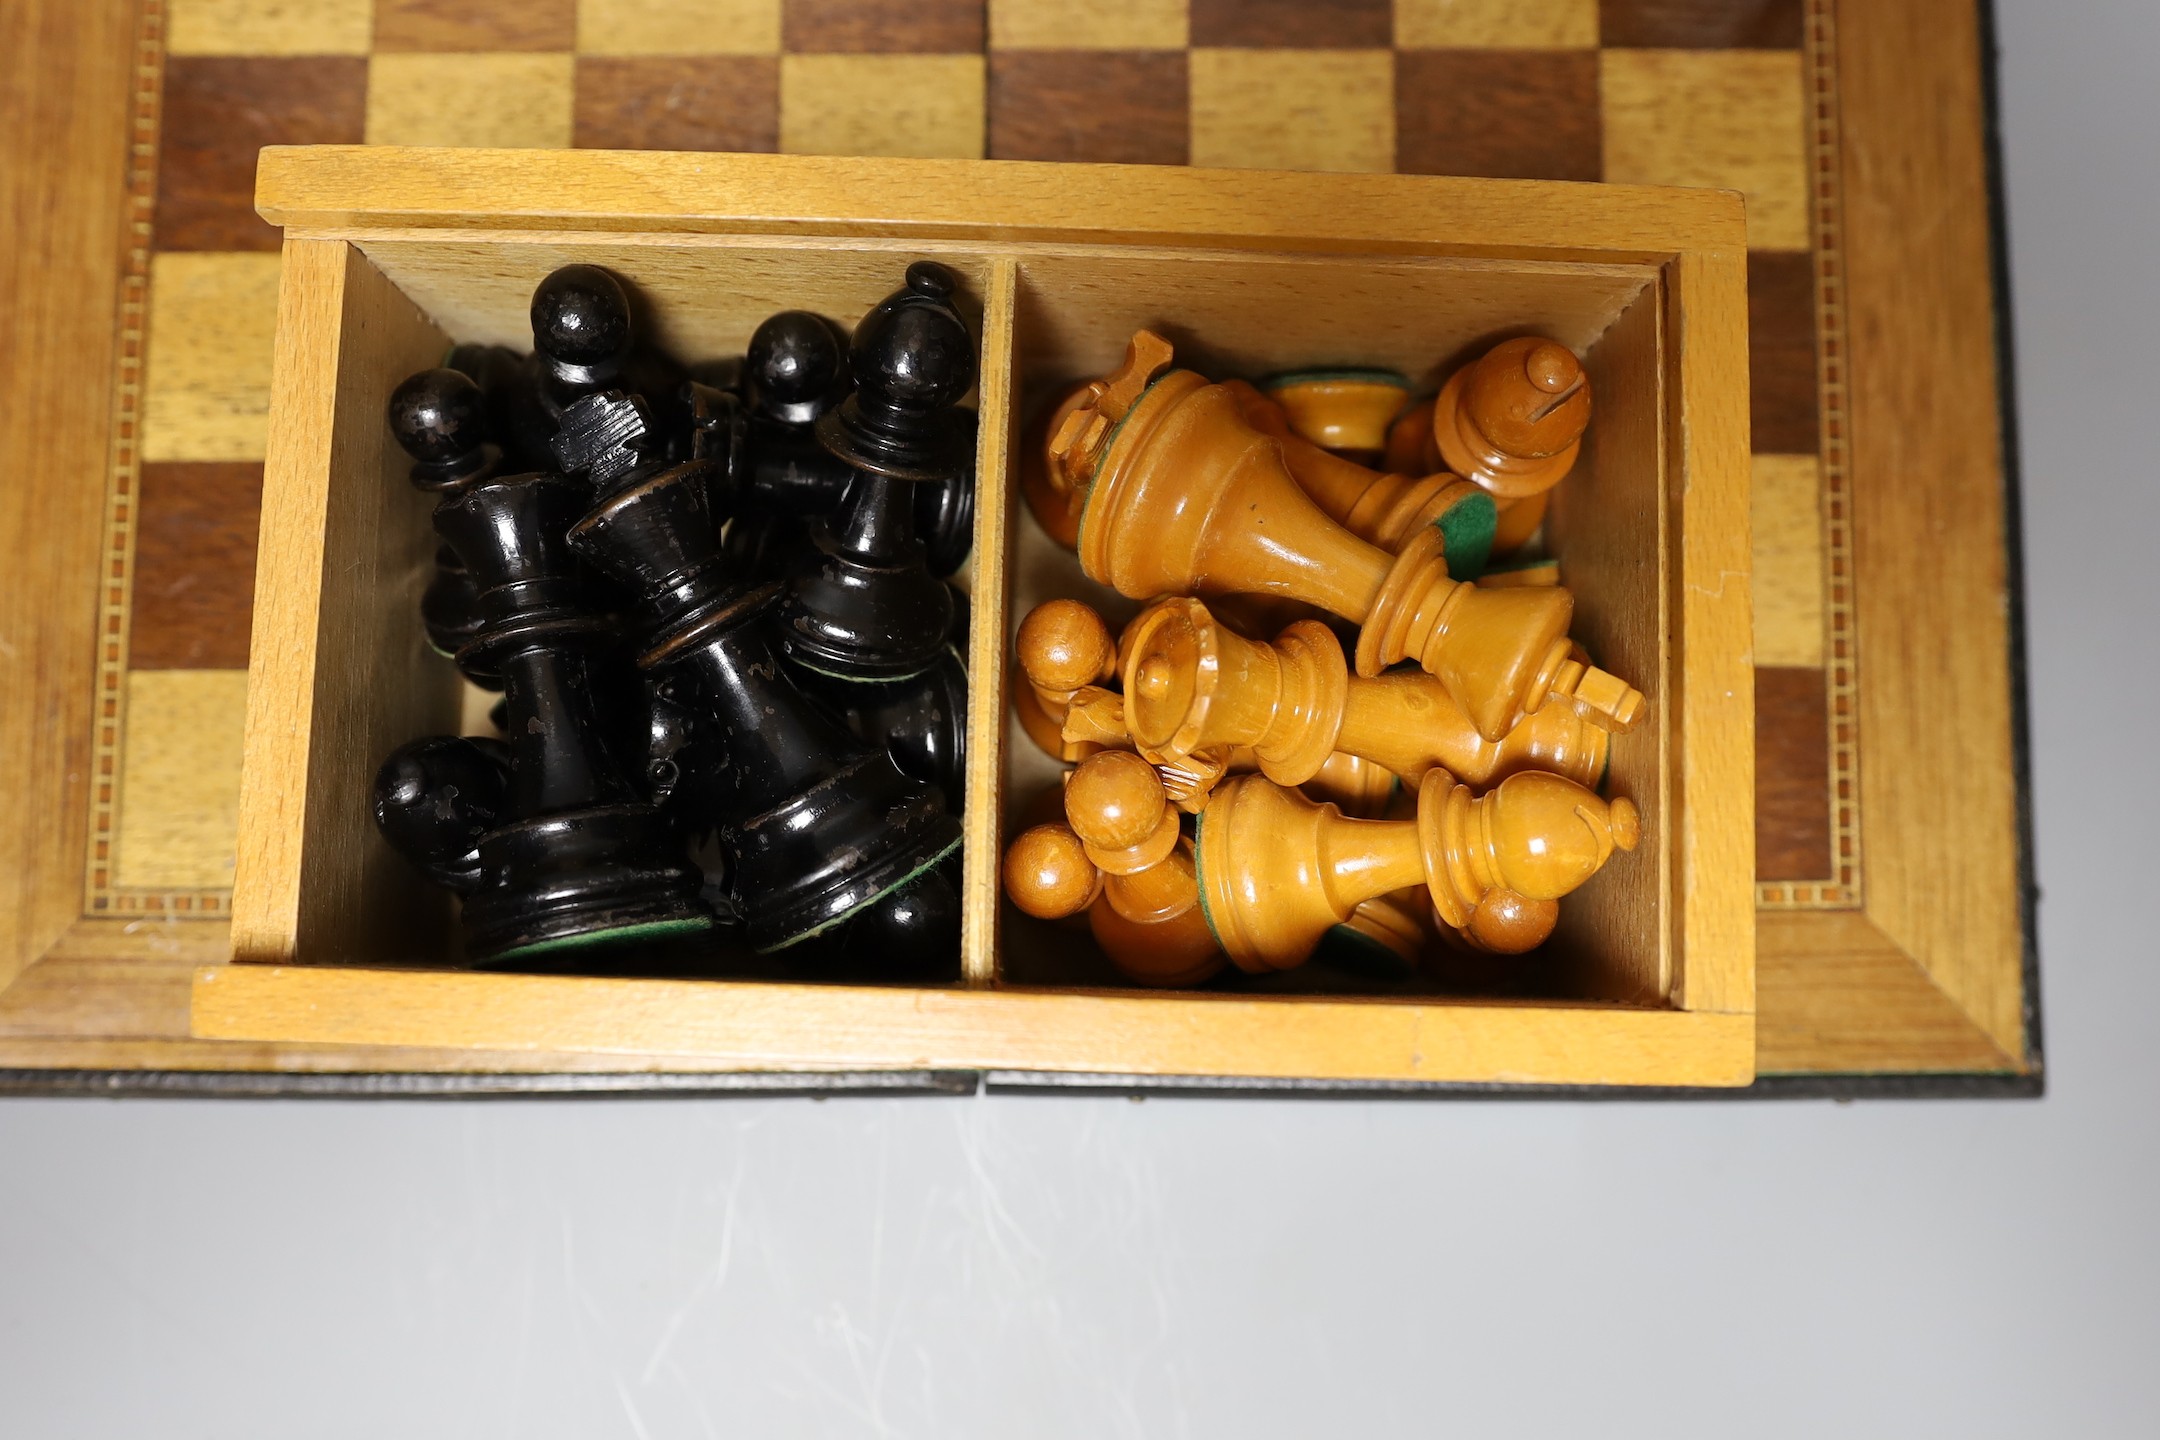 Two complete wood carved cased chess set pieces, king: 8cm and 7.5cm tall, together with a playing board